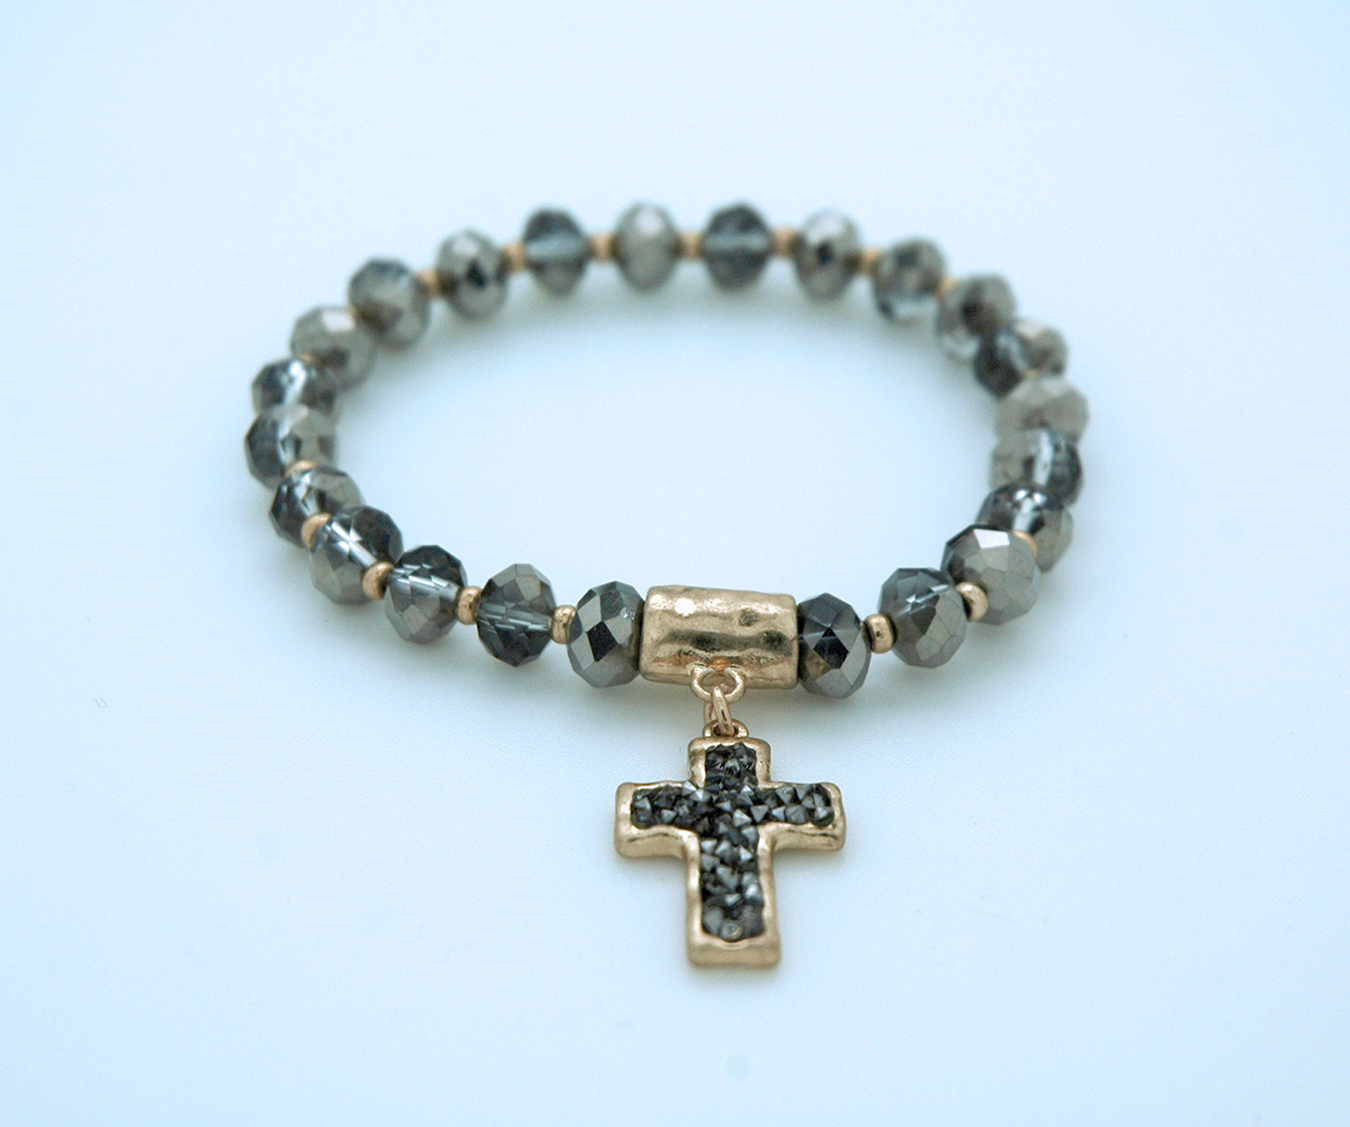 CU6657G - Silver Beads and Gold Cross Bracelet, on Elastic